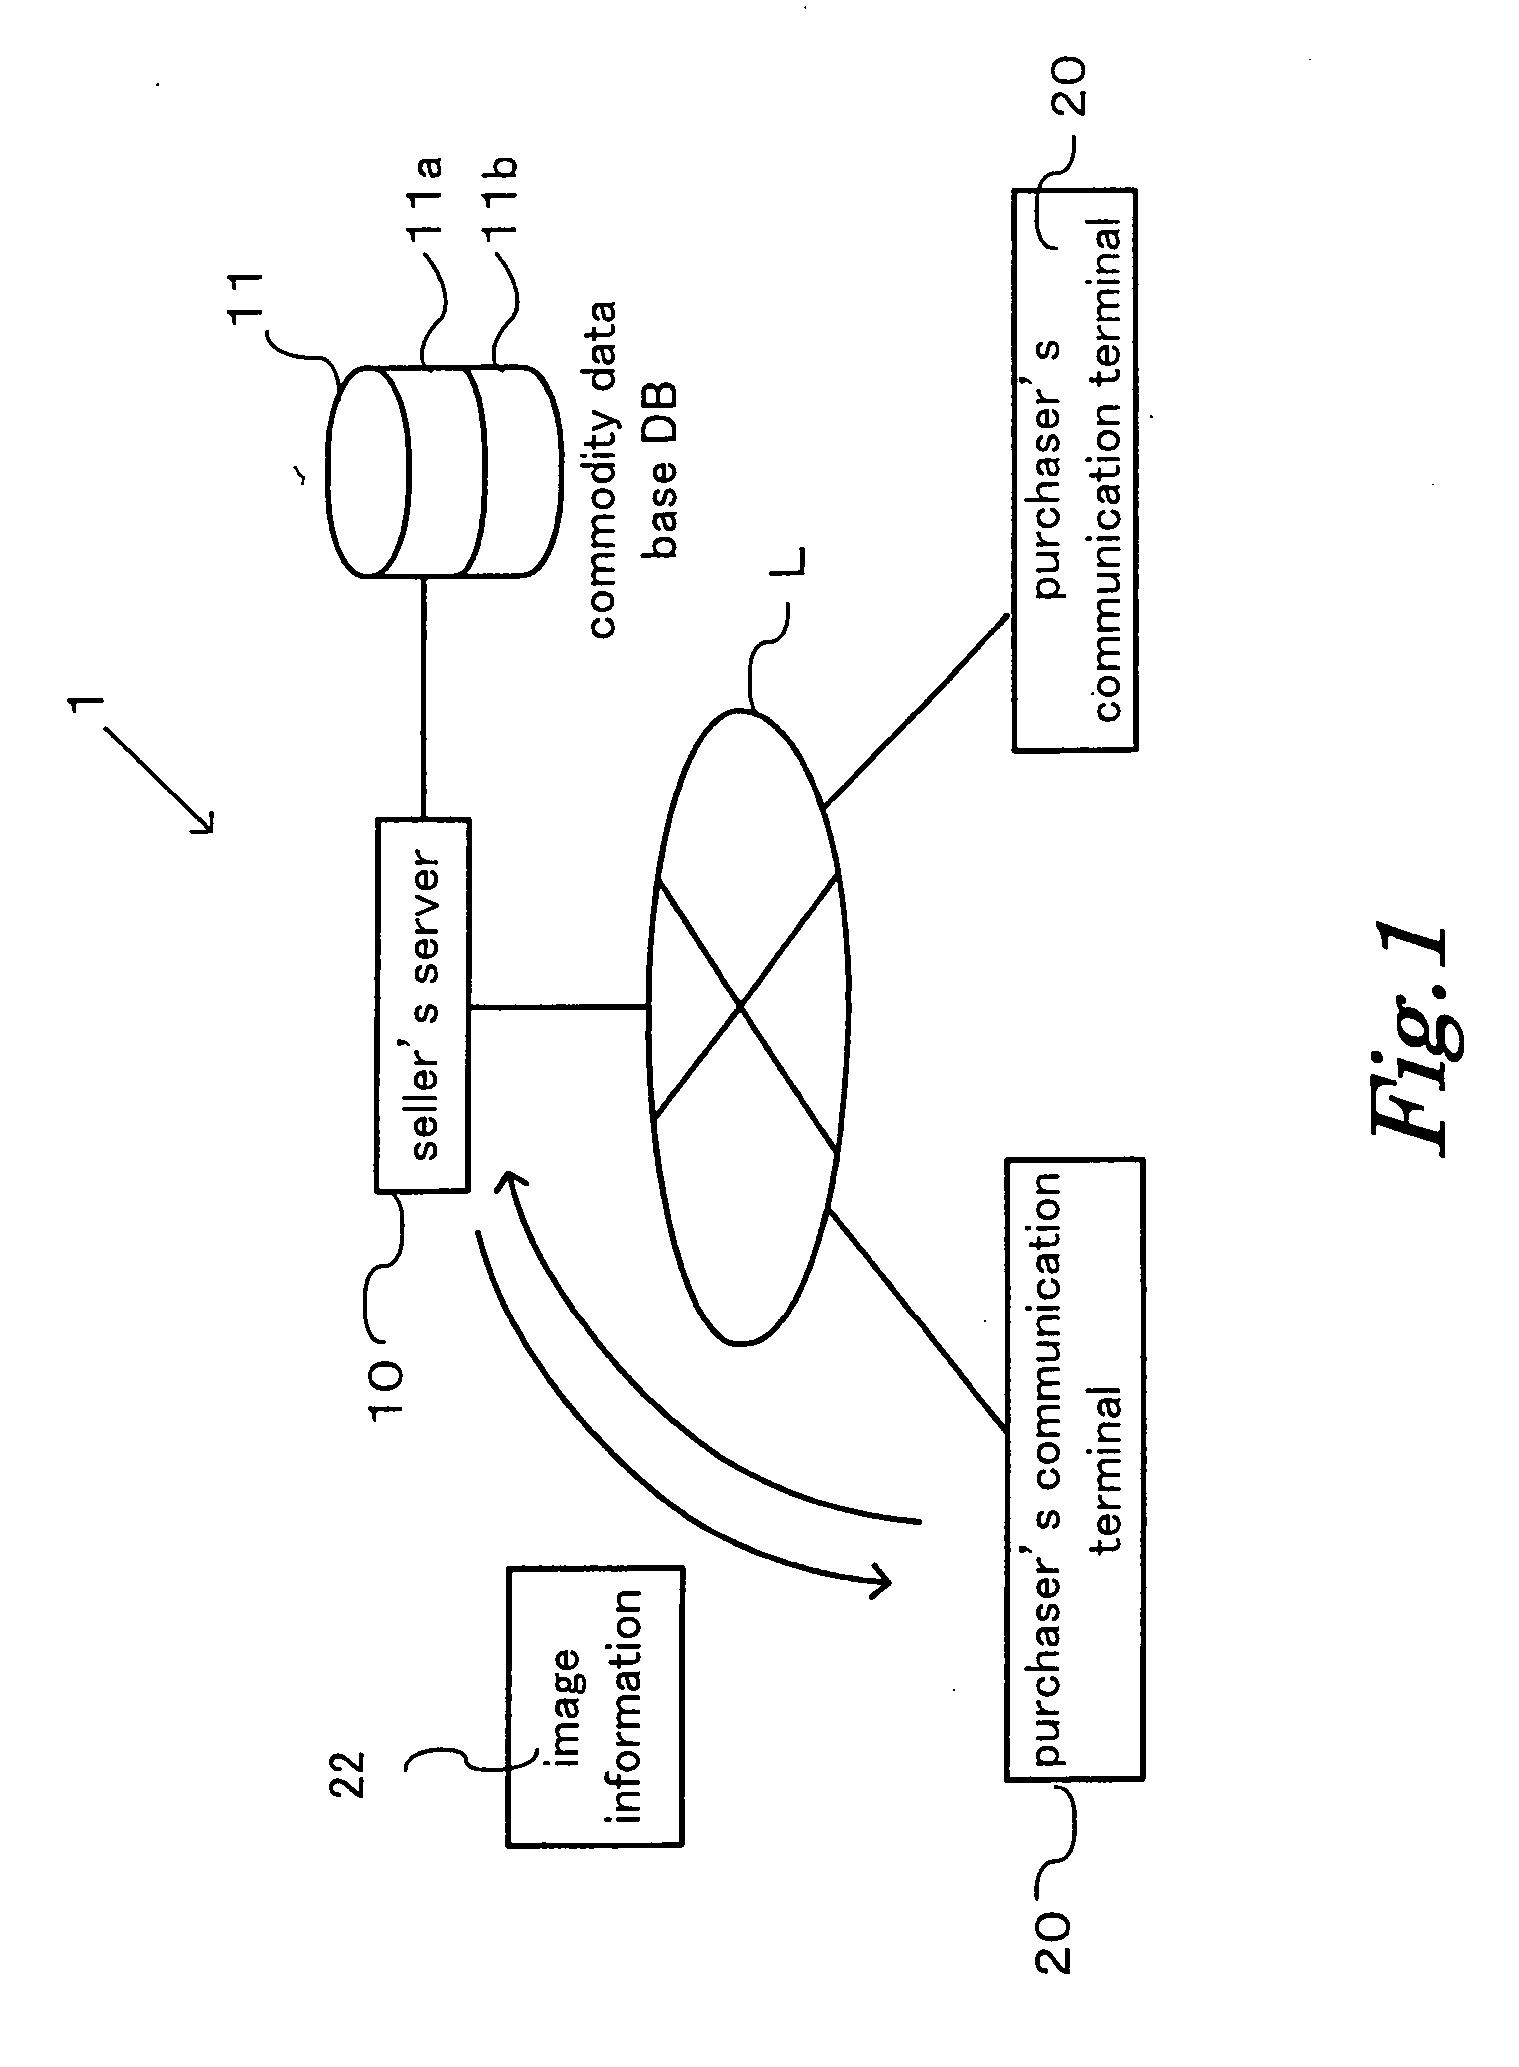 Electronic commerce system